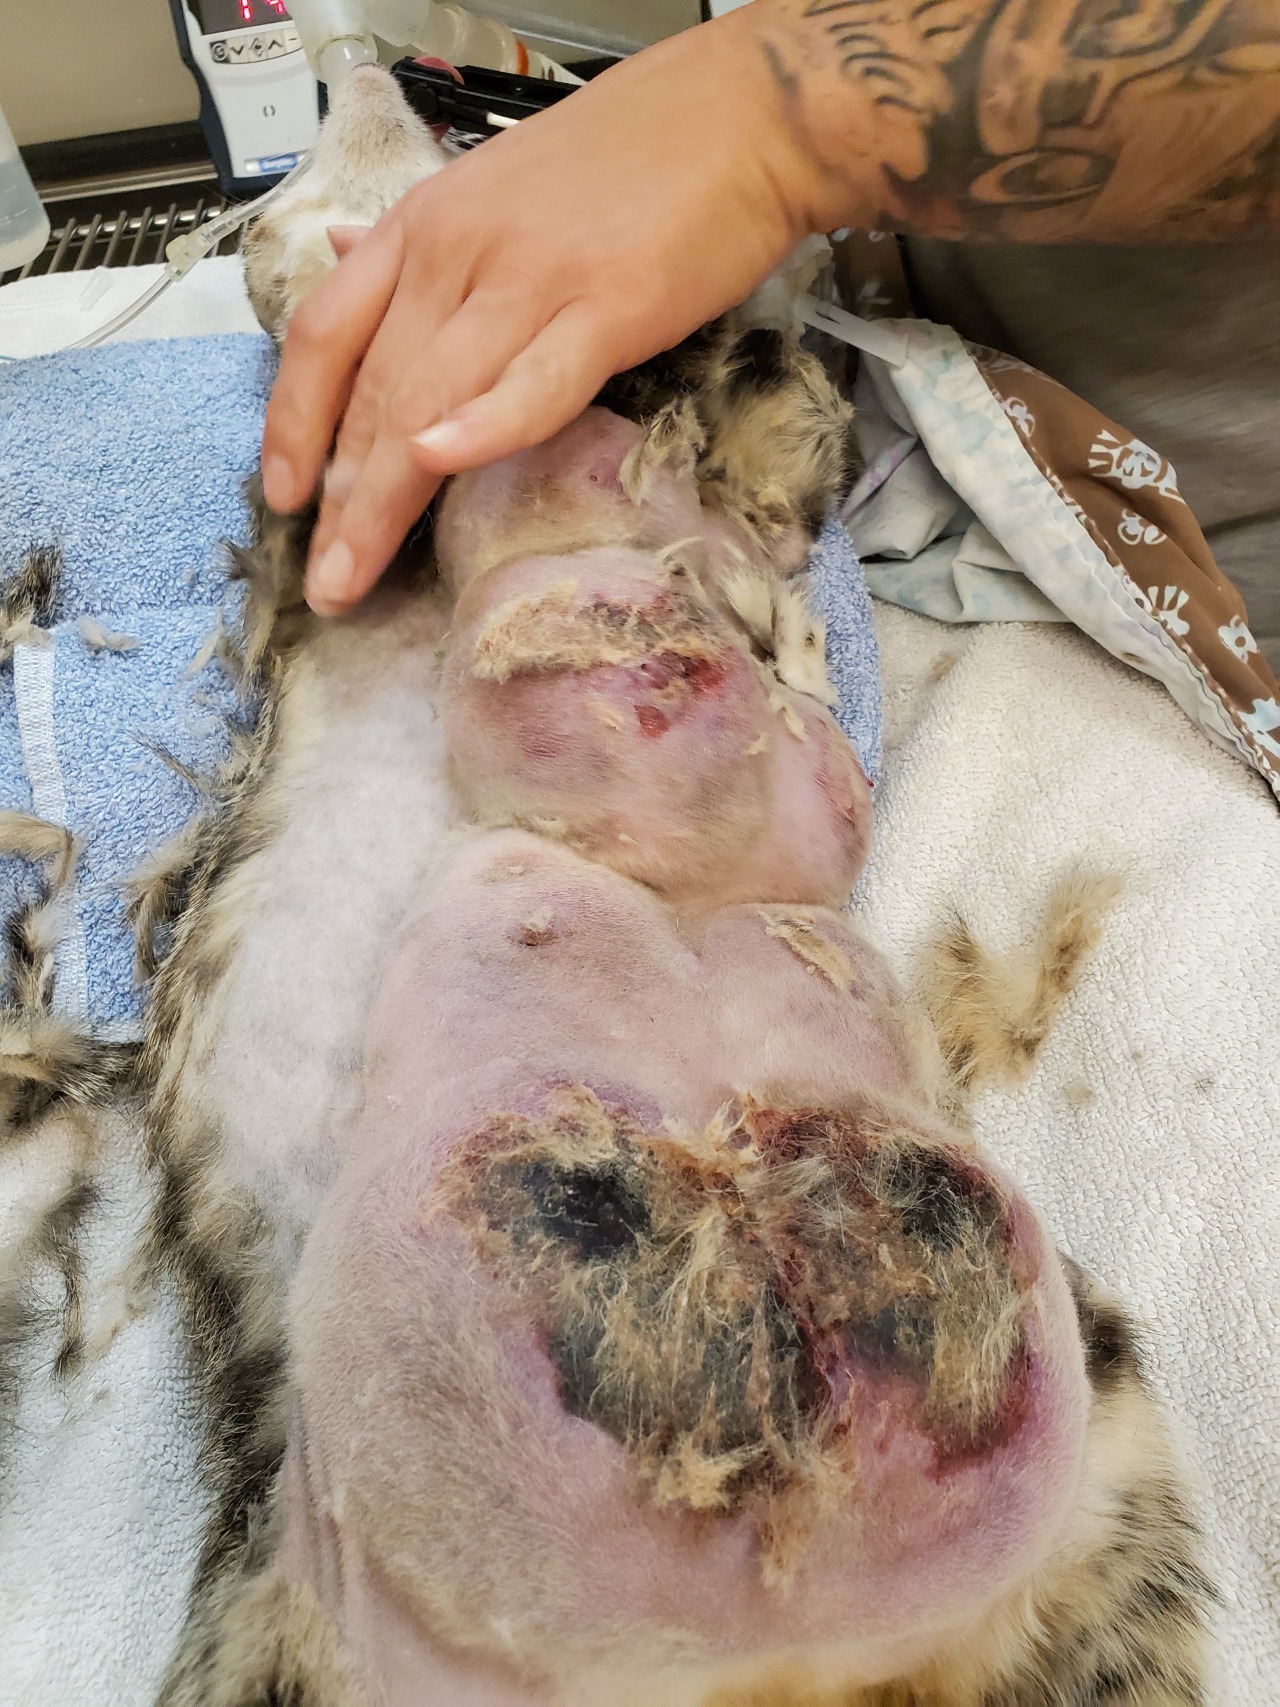 A cat with mastitis undergoing treatment